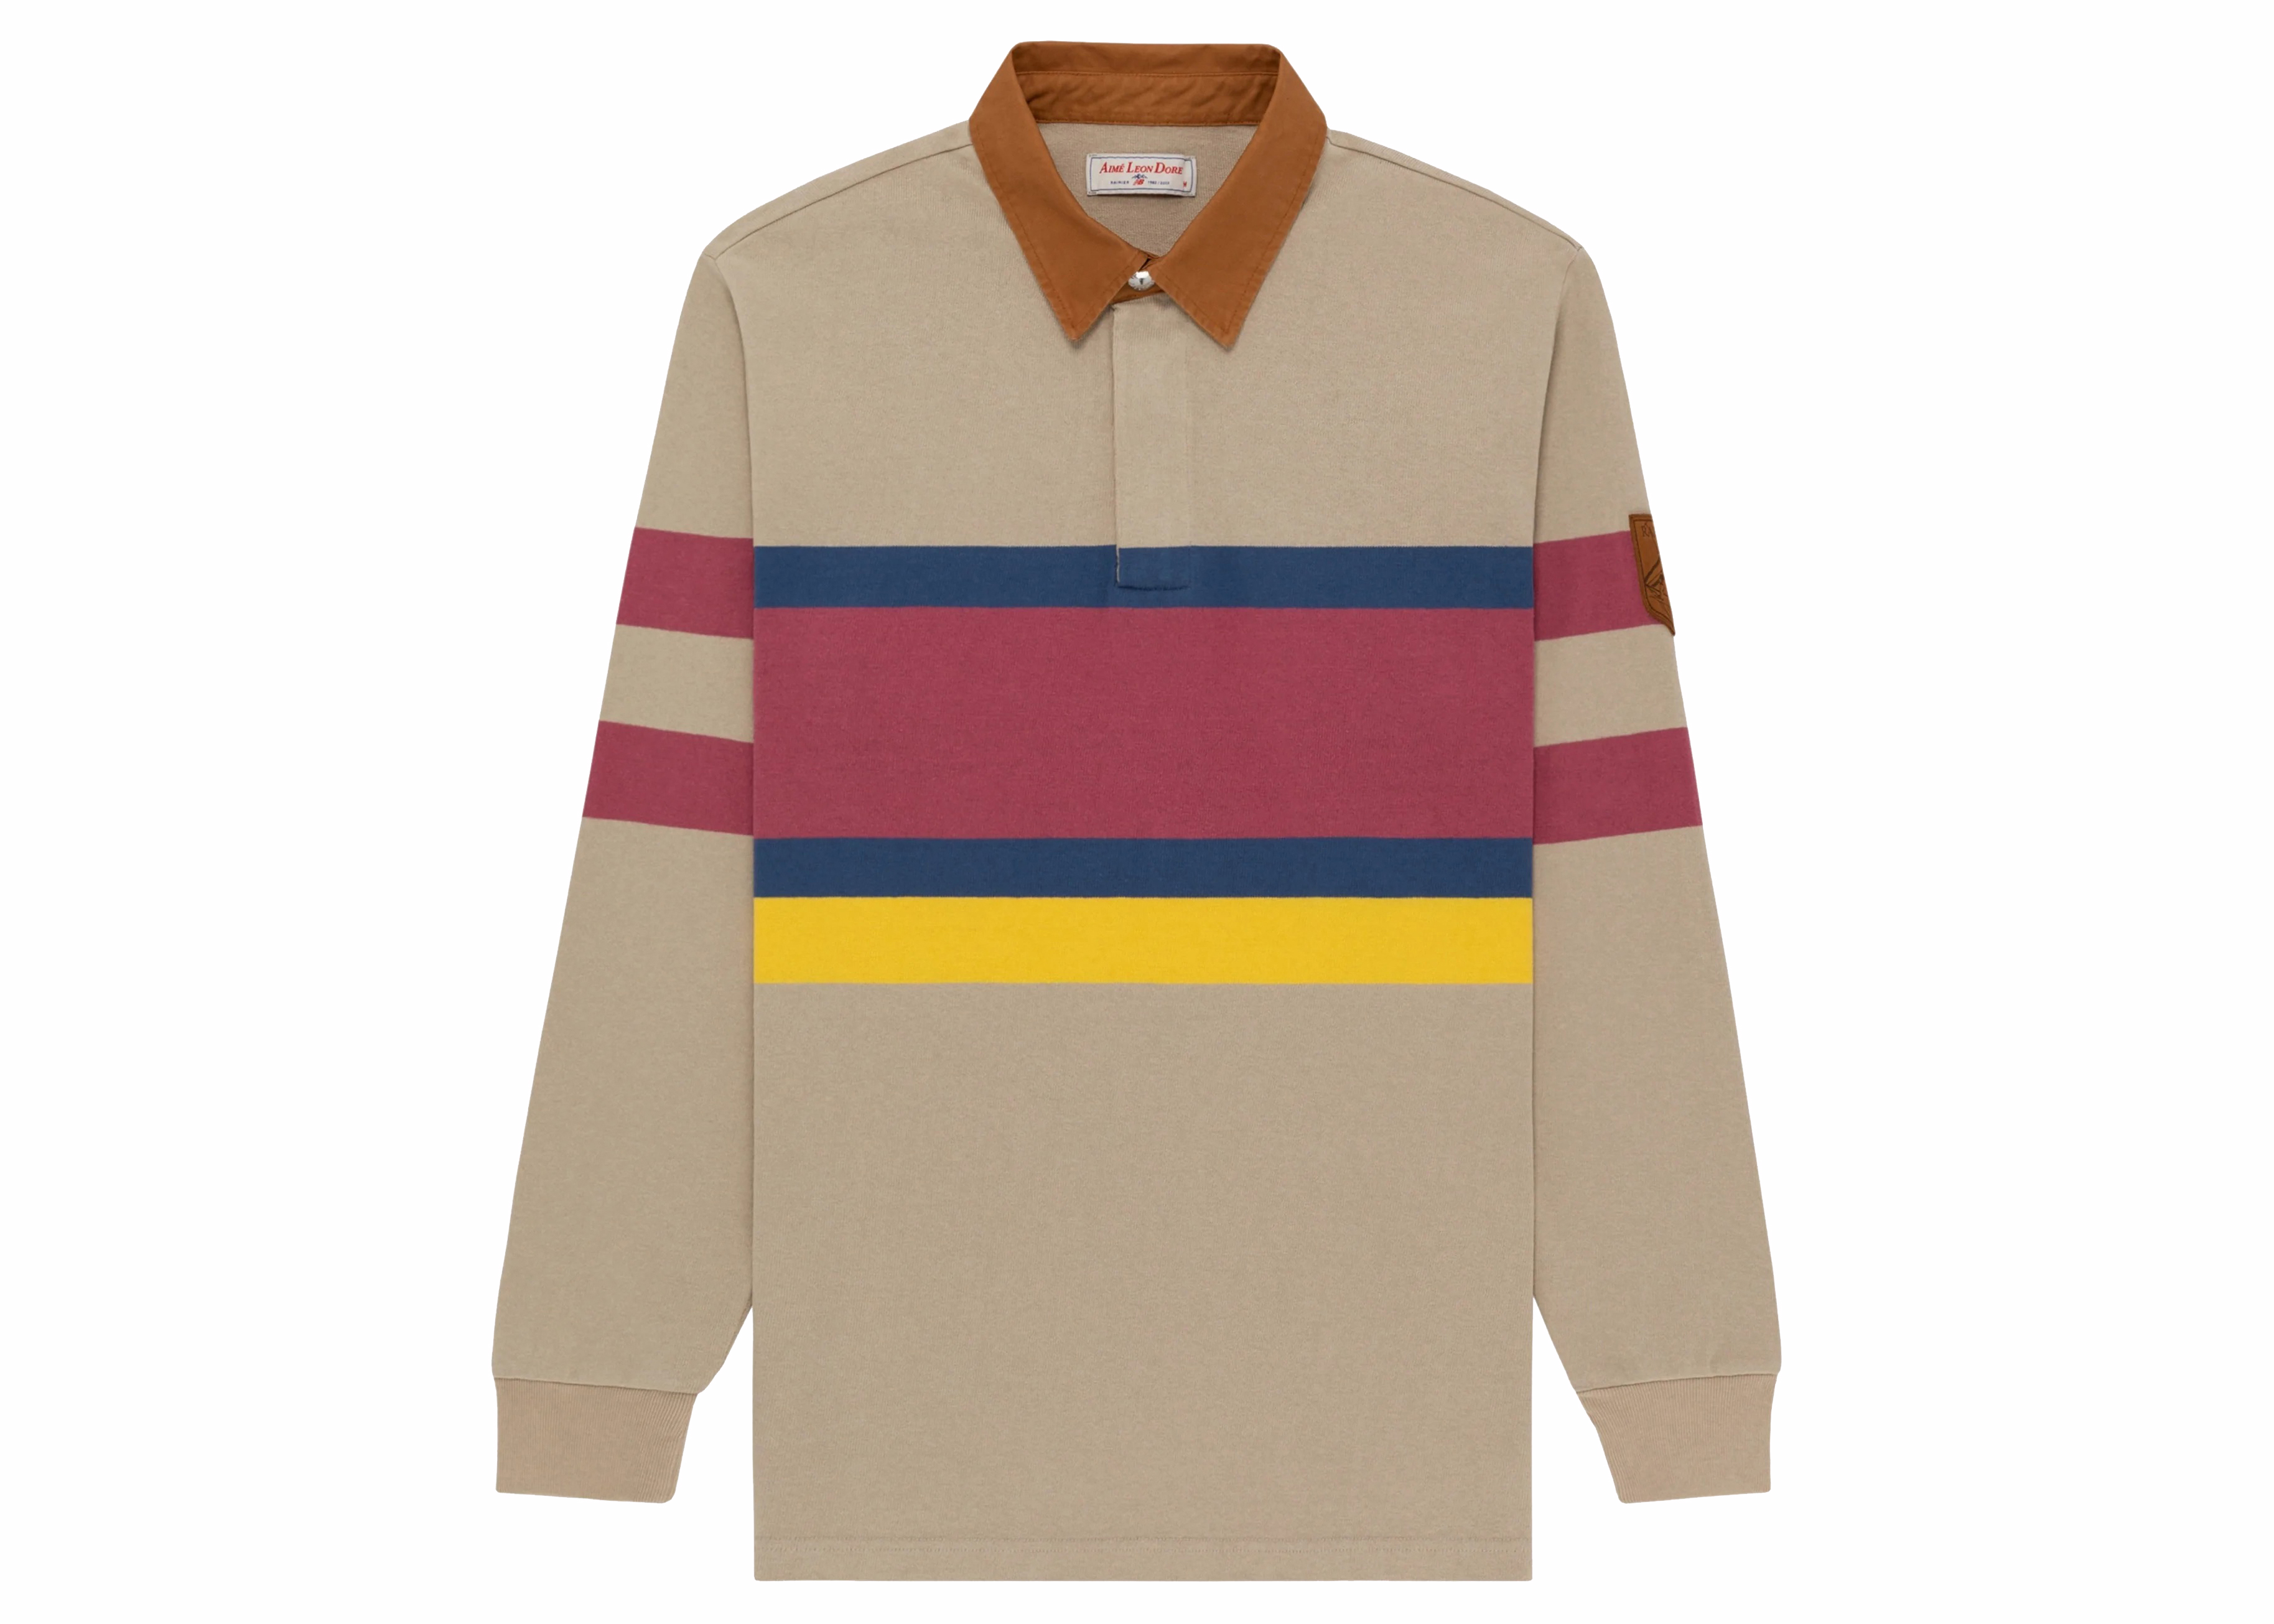 Aime Leon Dore New Balance Striped Rugby Shirt Multicolor/Striped